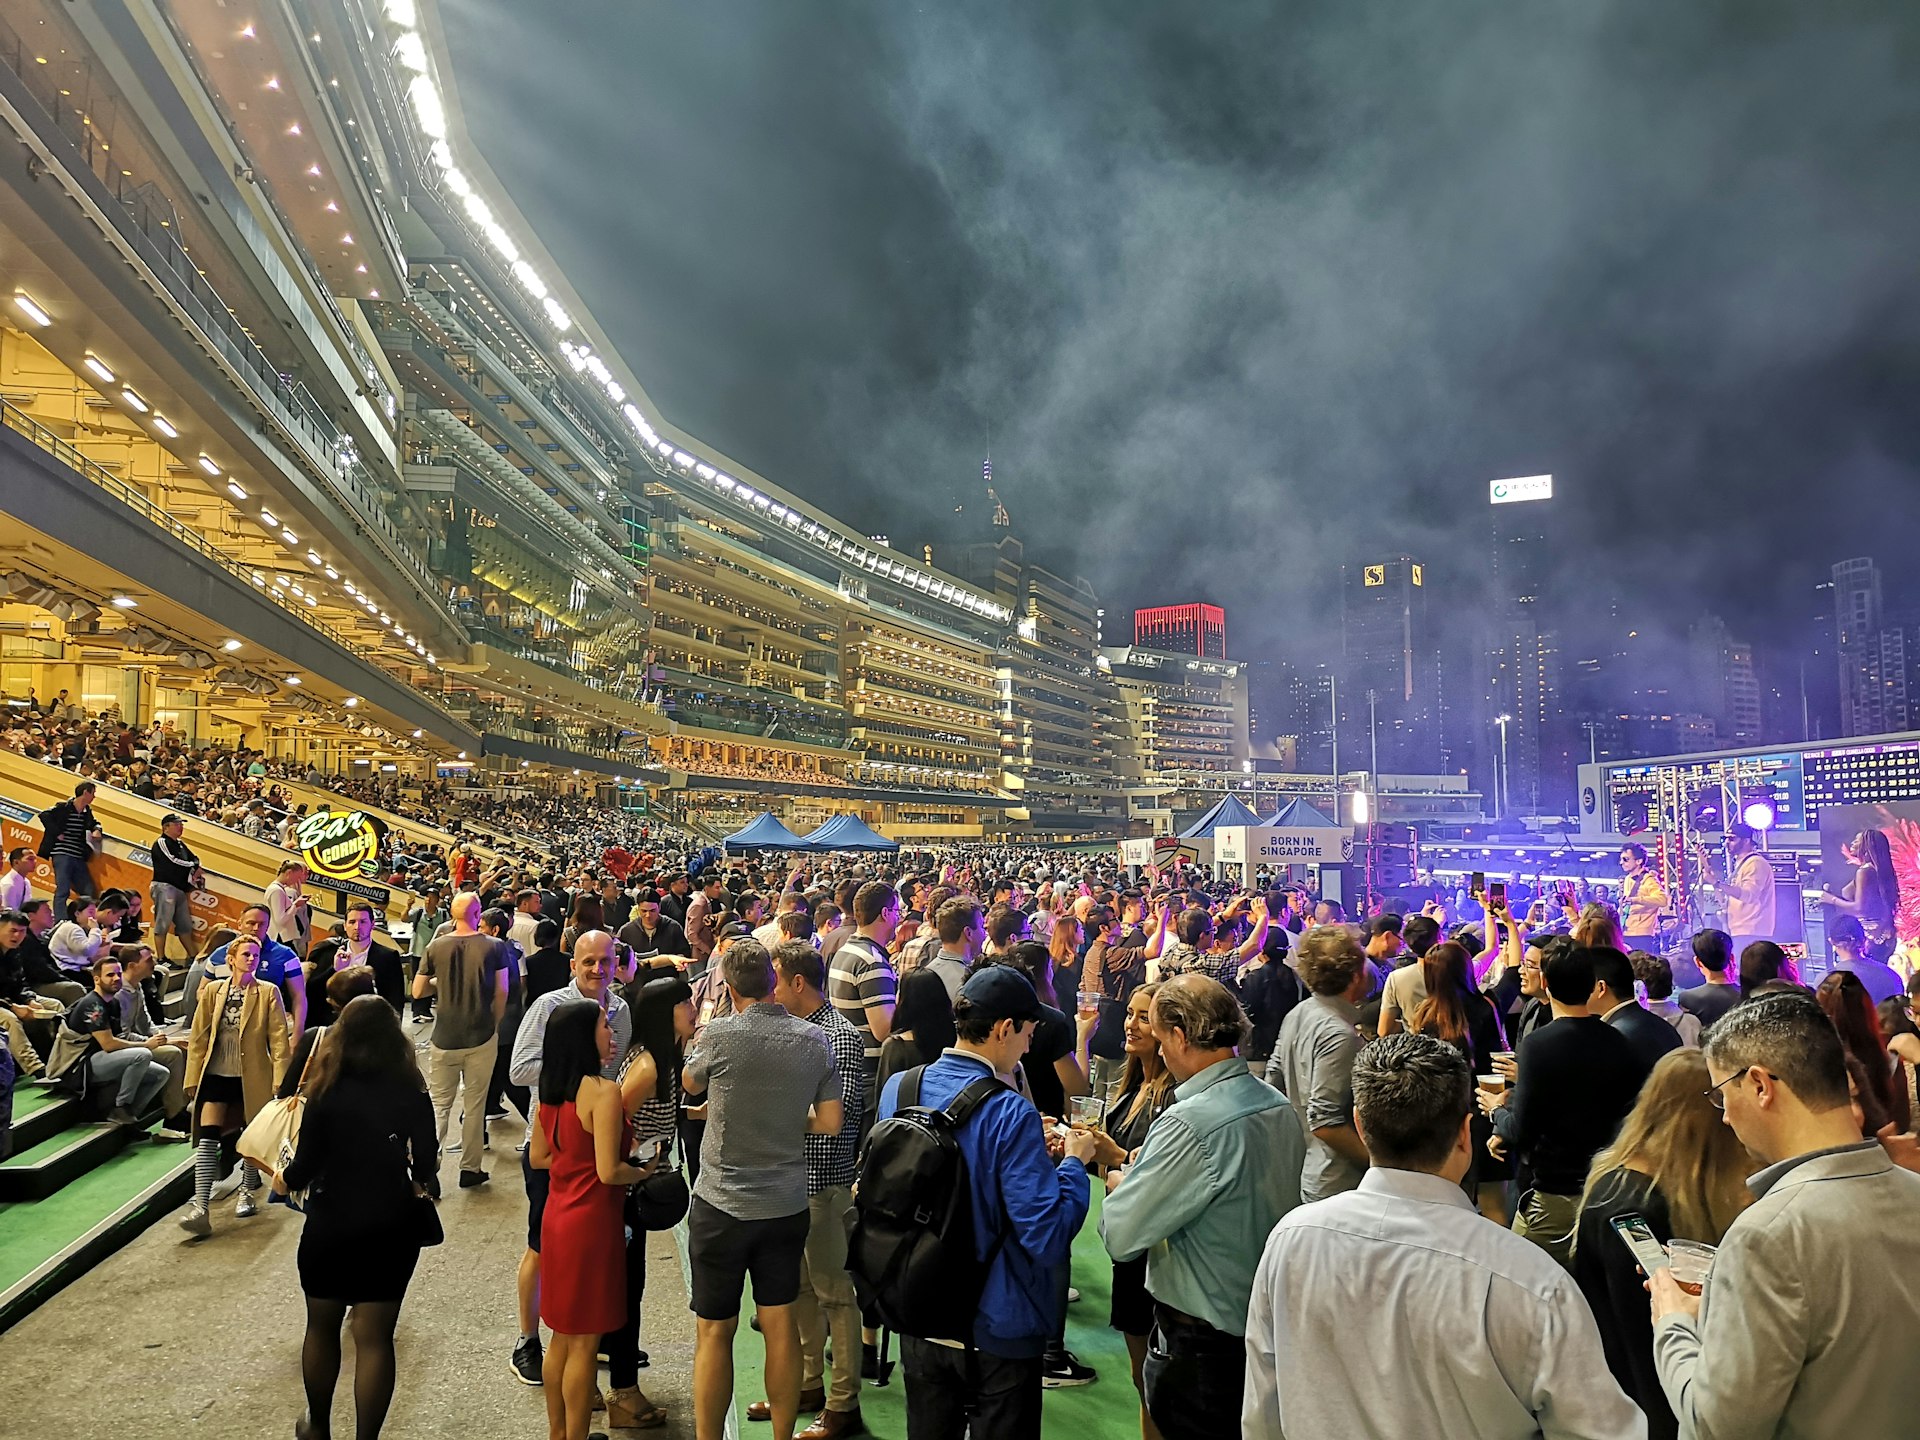 Fans stand in a crowd at the famous Happy Valley racecourse, used by the Hong Kong Jockey Club for horse racing meets, at night